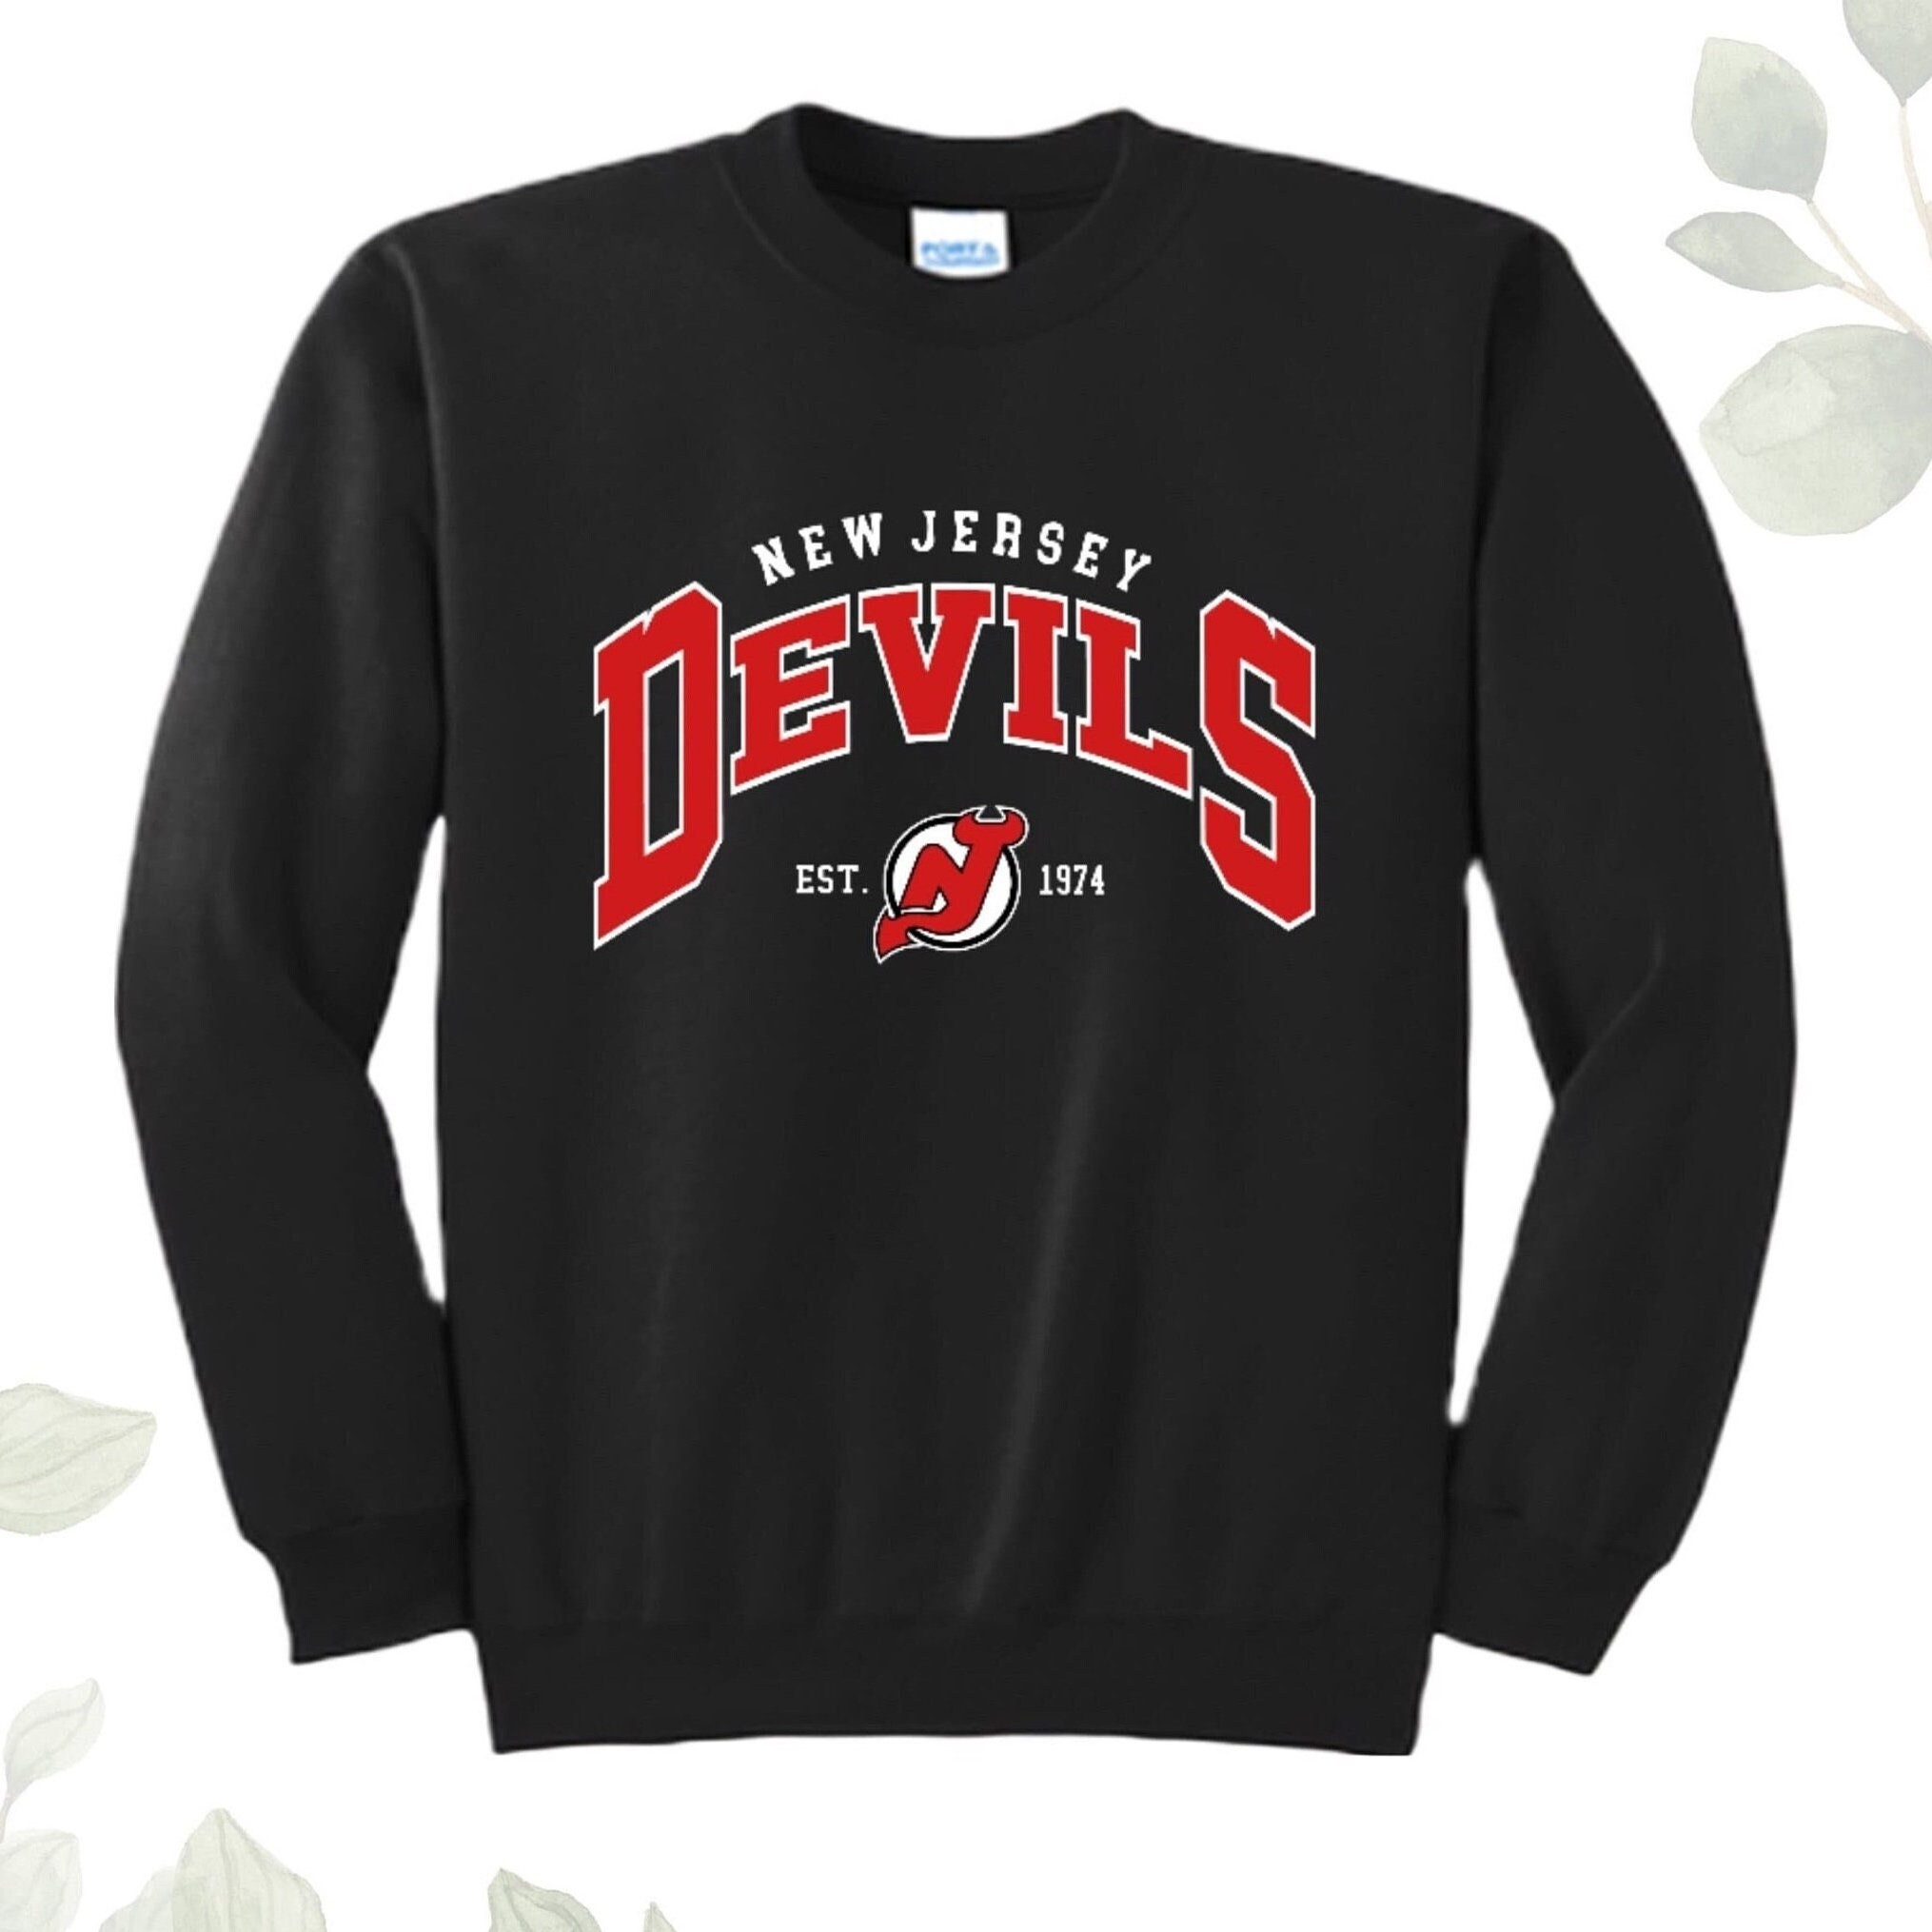 The MCR/NJD Shirt is really nice : r/devils